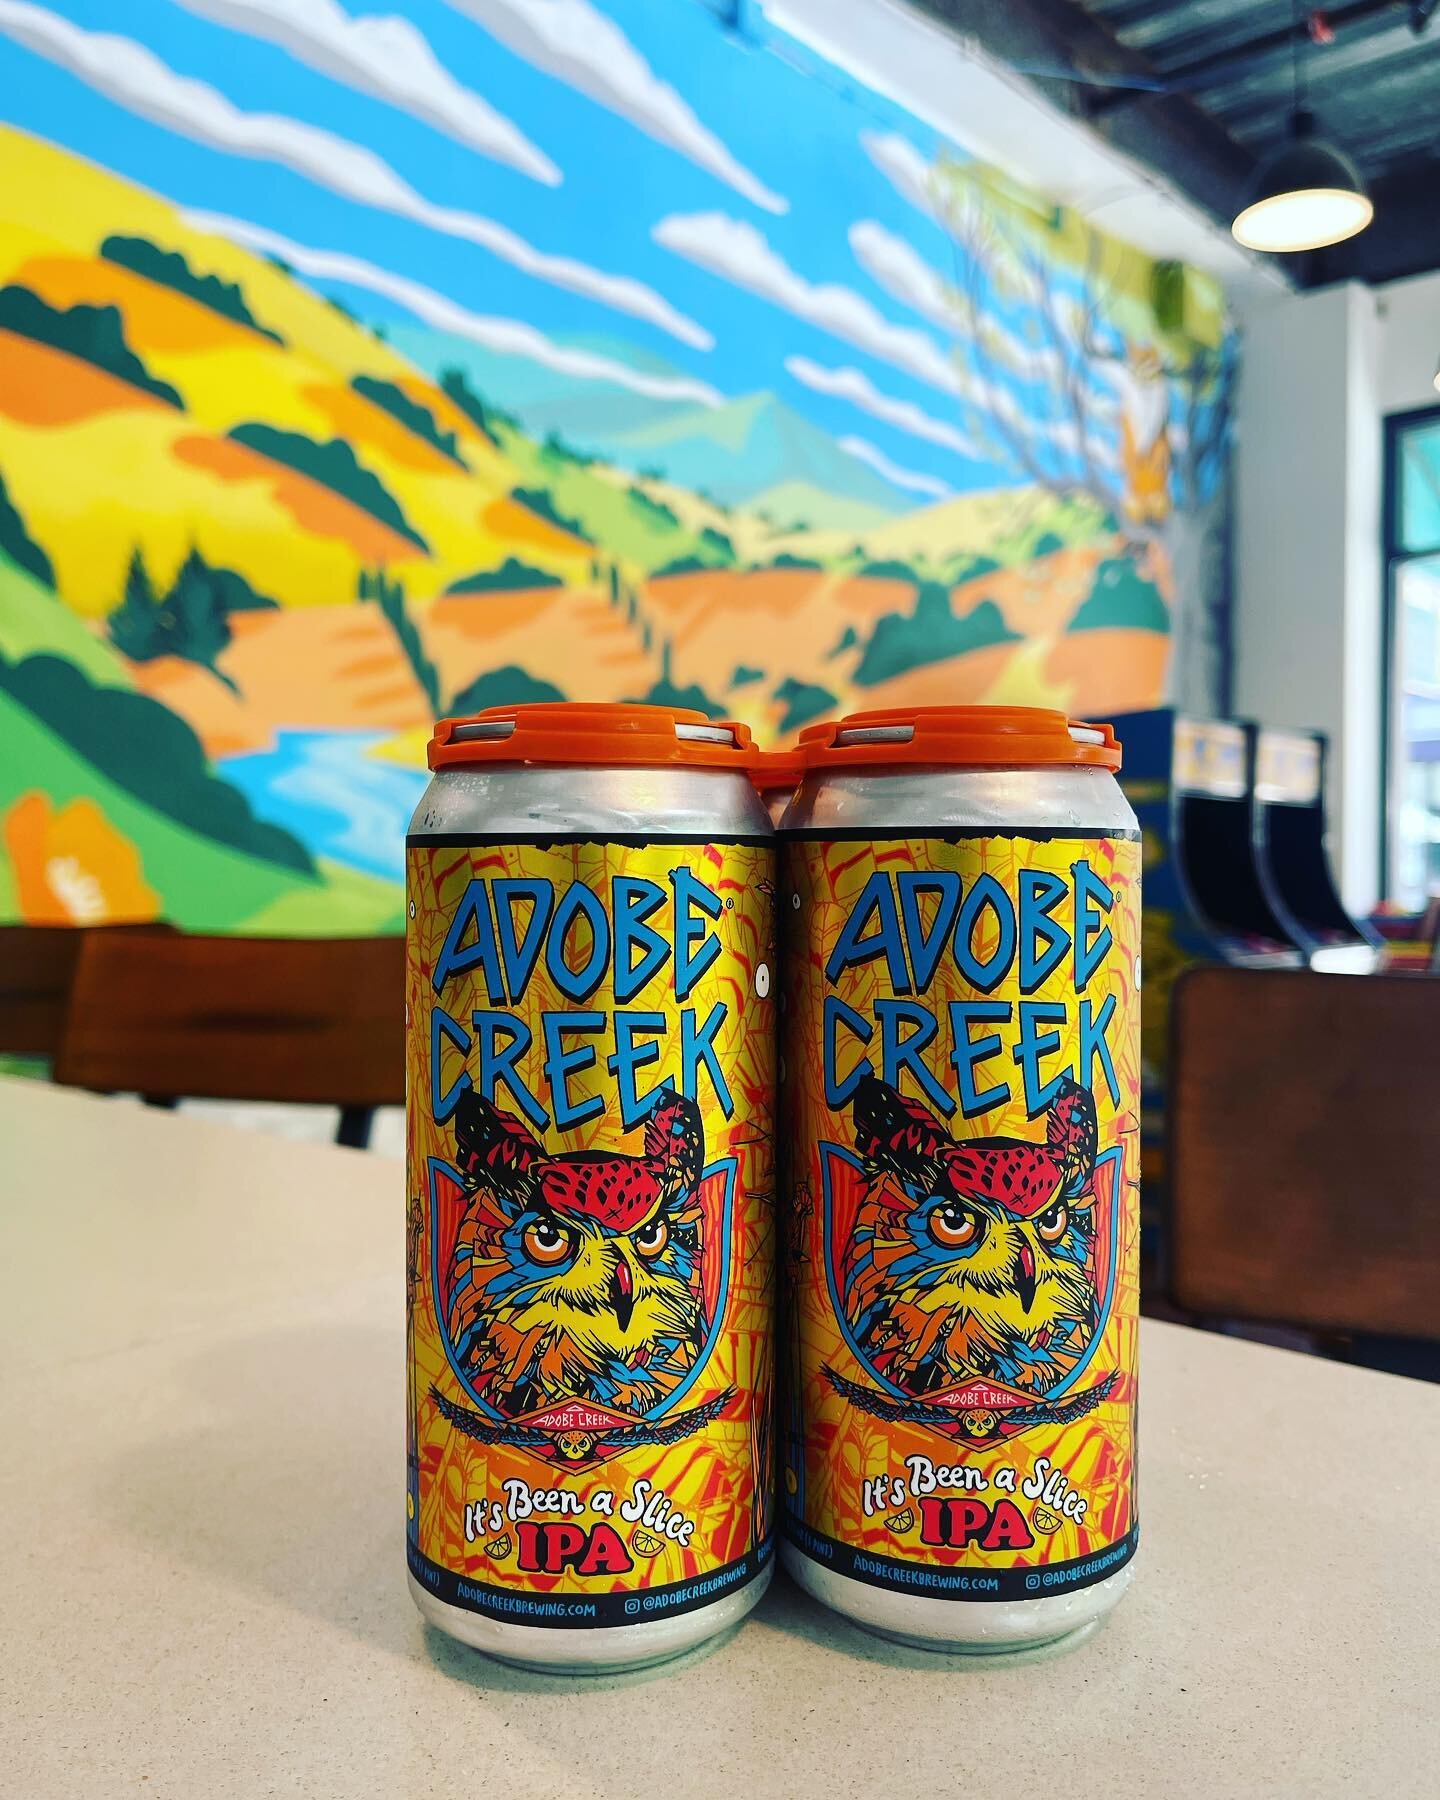 It&rsquo;s Been a Slice Hazy IPA is back in cans and on tap in Petaluma and Novato!
We also have @tortillarealpetaluma serving up their delicious Mexican cuisine from 4-8pm today at the Novato brewery.  Bonus the Warriors are playing!
🍻🦉🦌🦉🍻